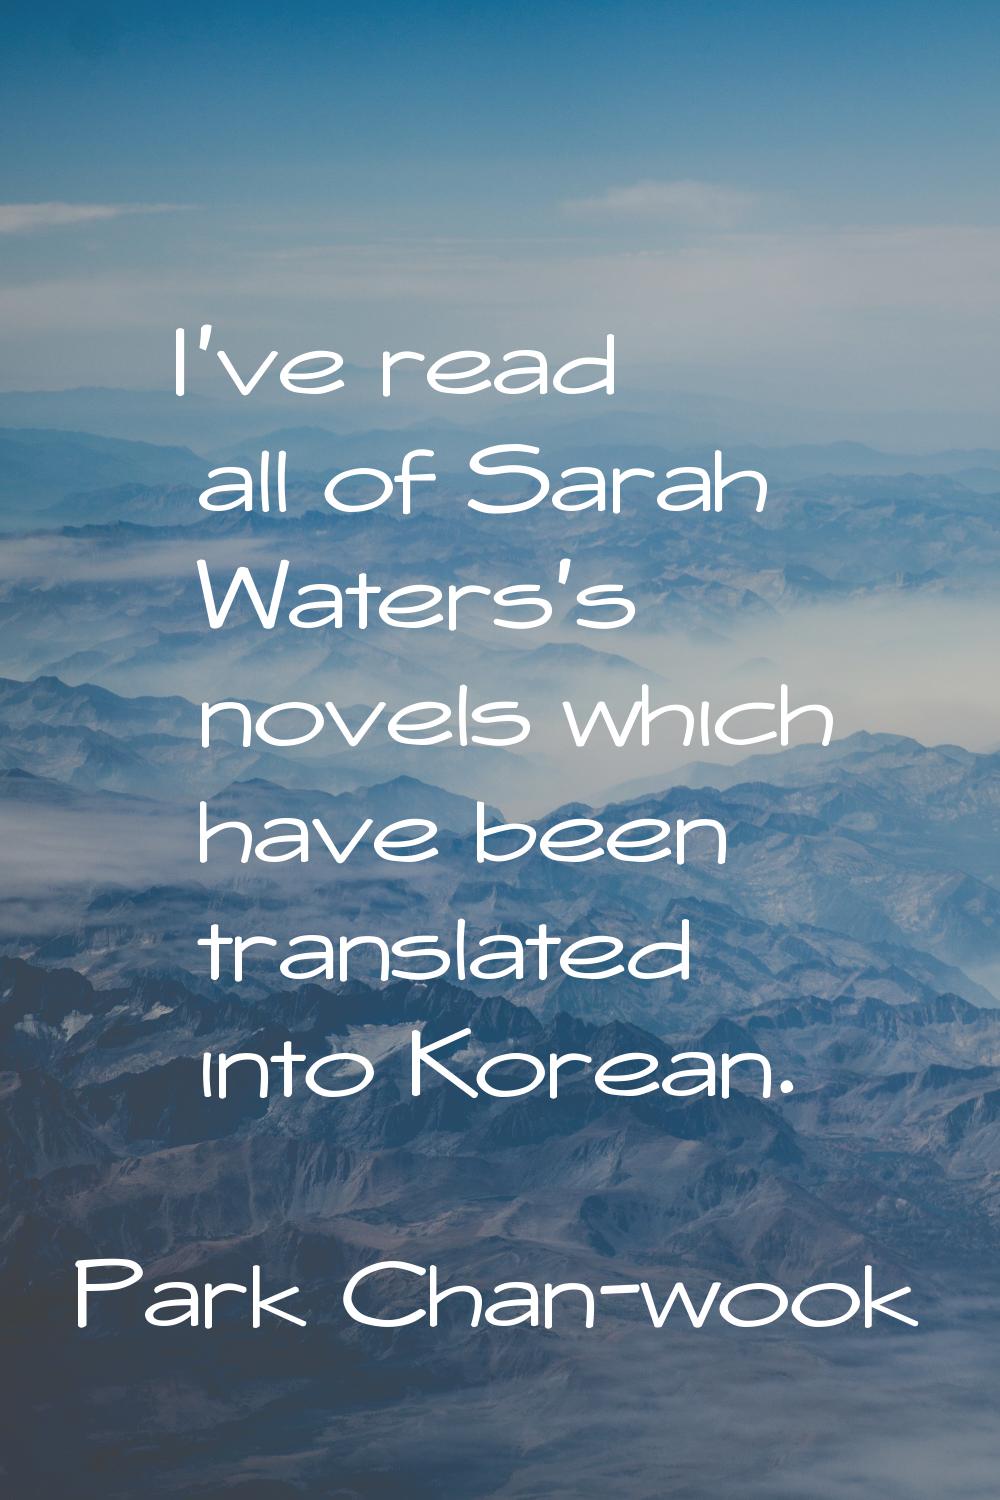 I've read all of Sarah Waters's novels which have been translated into Korean.